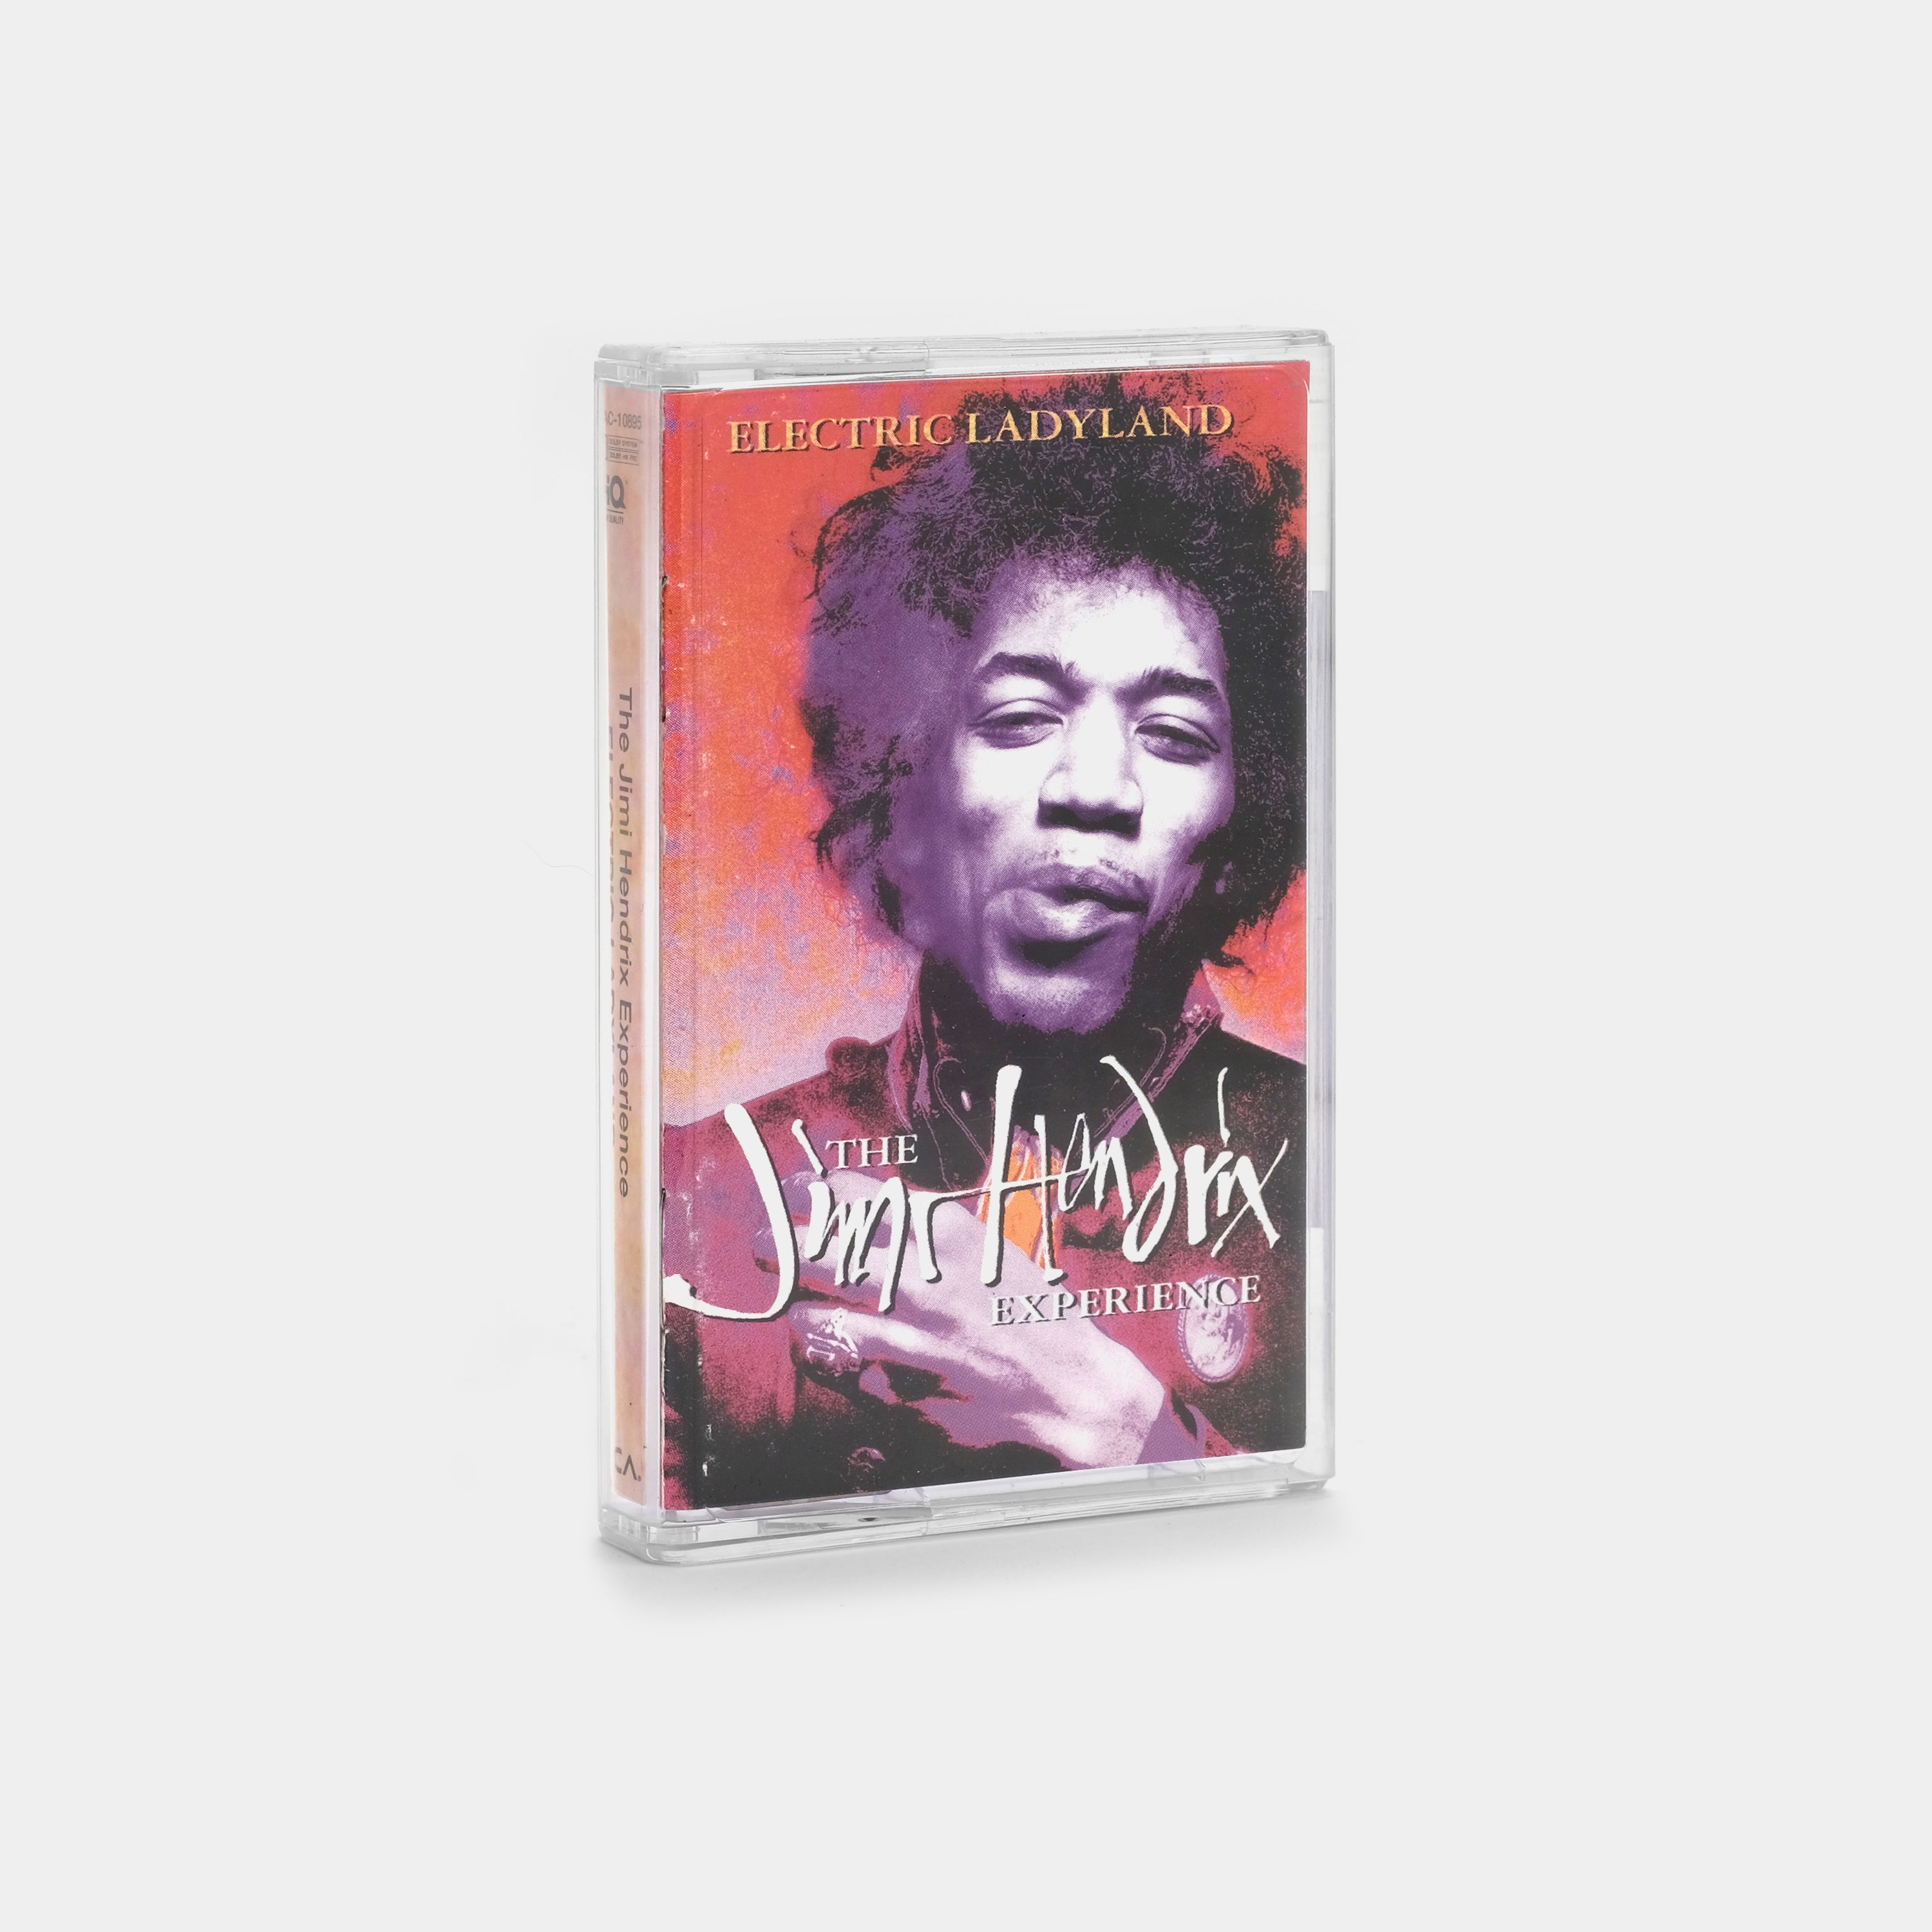 The Jimi Hendrix Experience - Electric Ladyland Cassette Tape